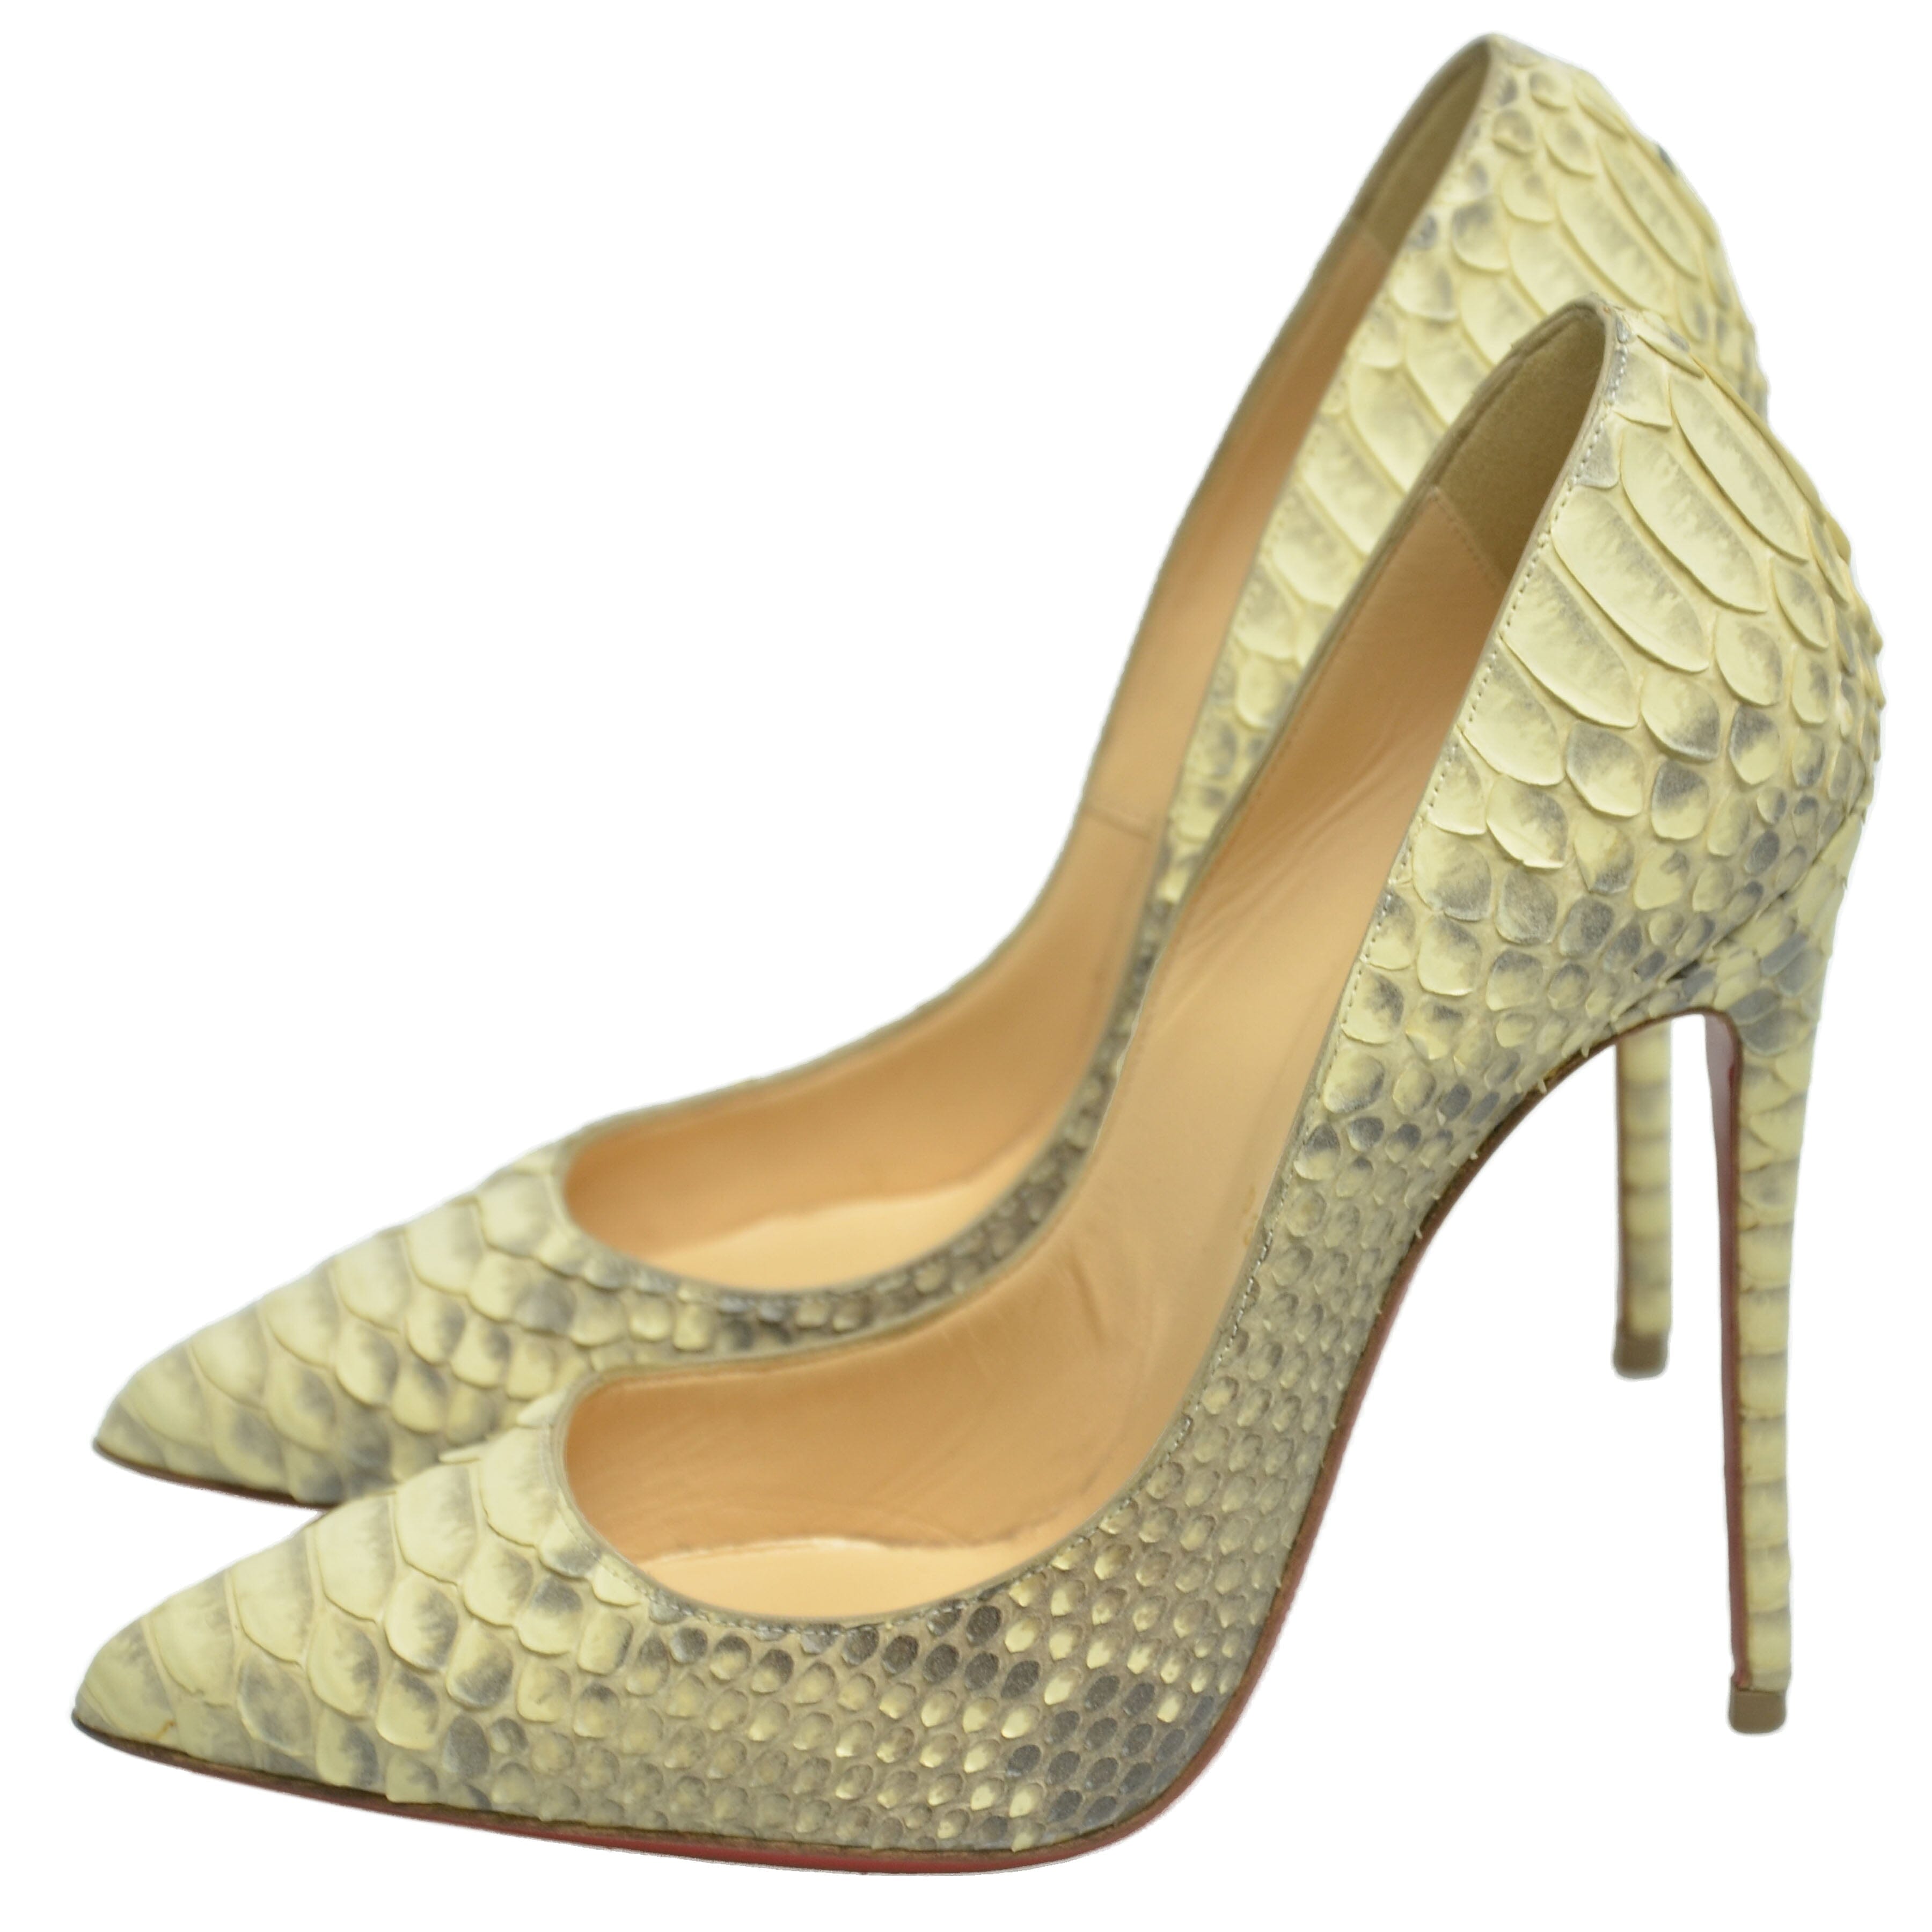 Beige Pigalle Follies Pointed Toe Pumps Shoes Christian Louboutin